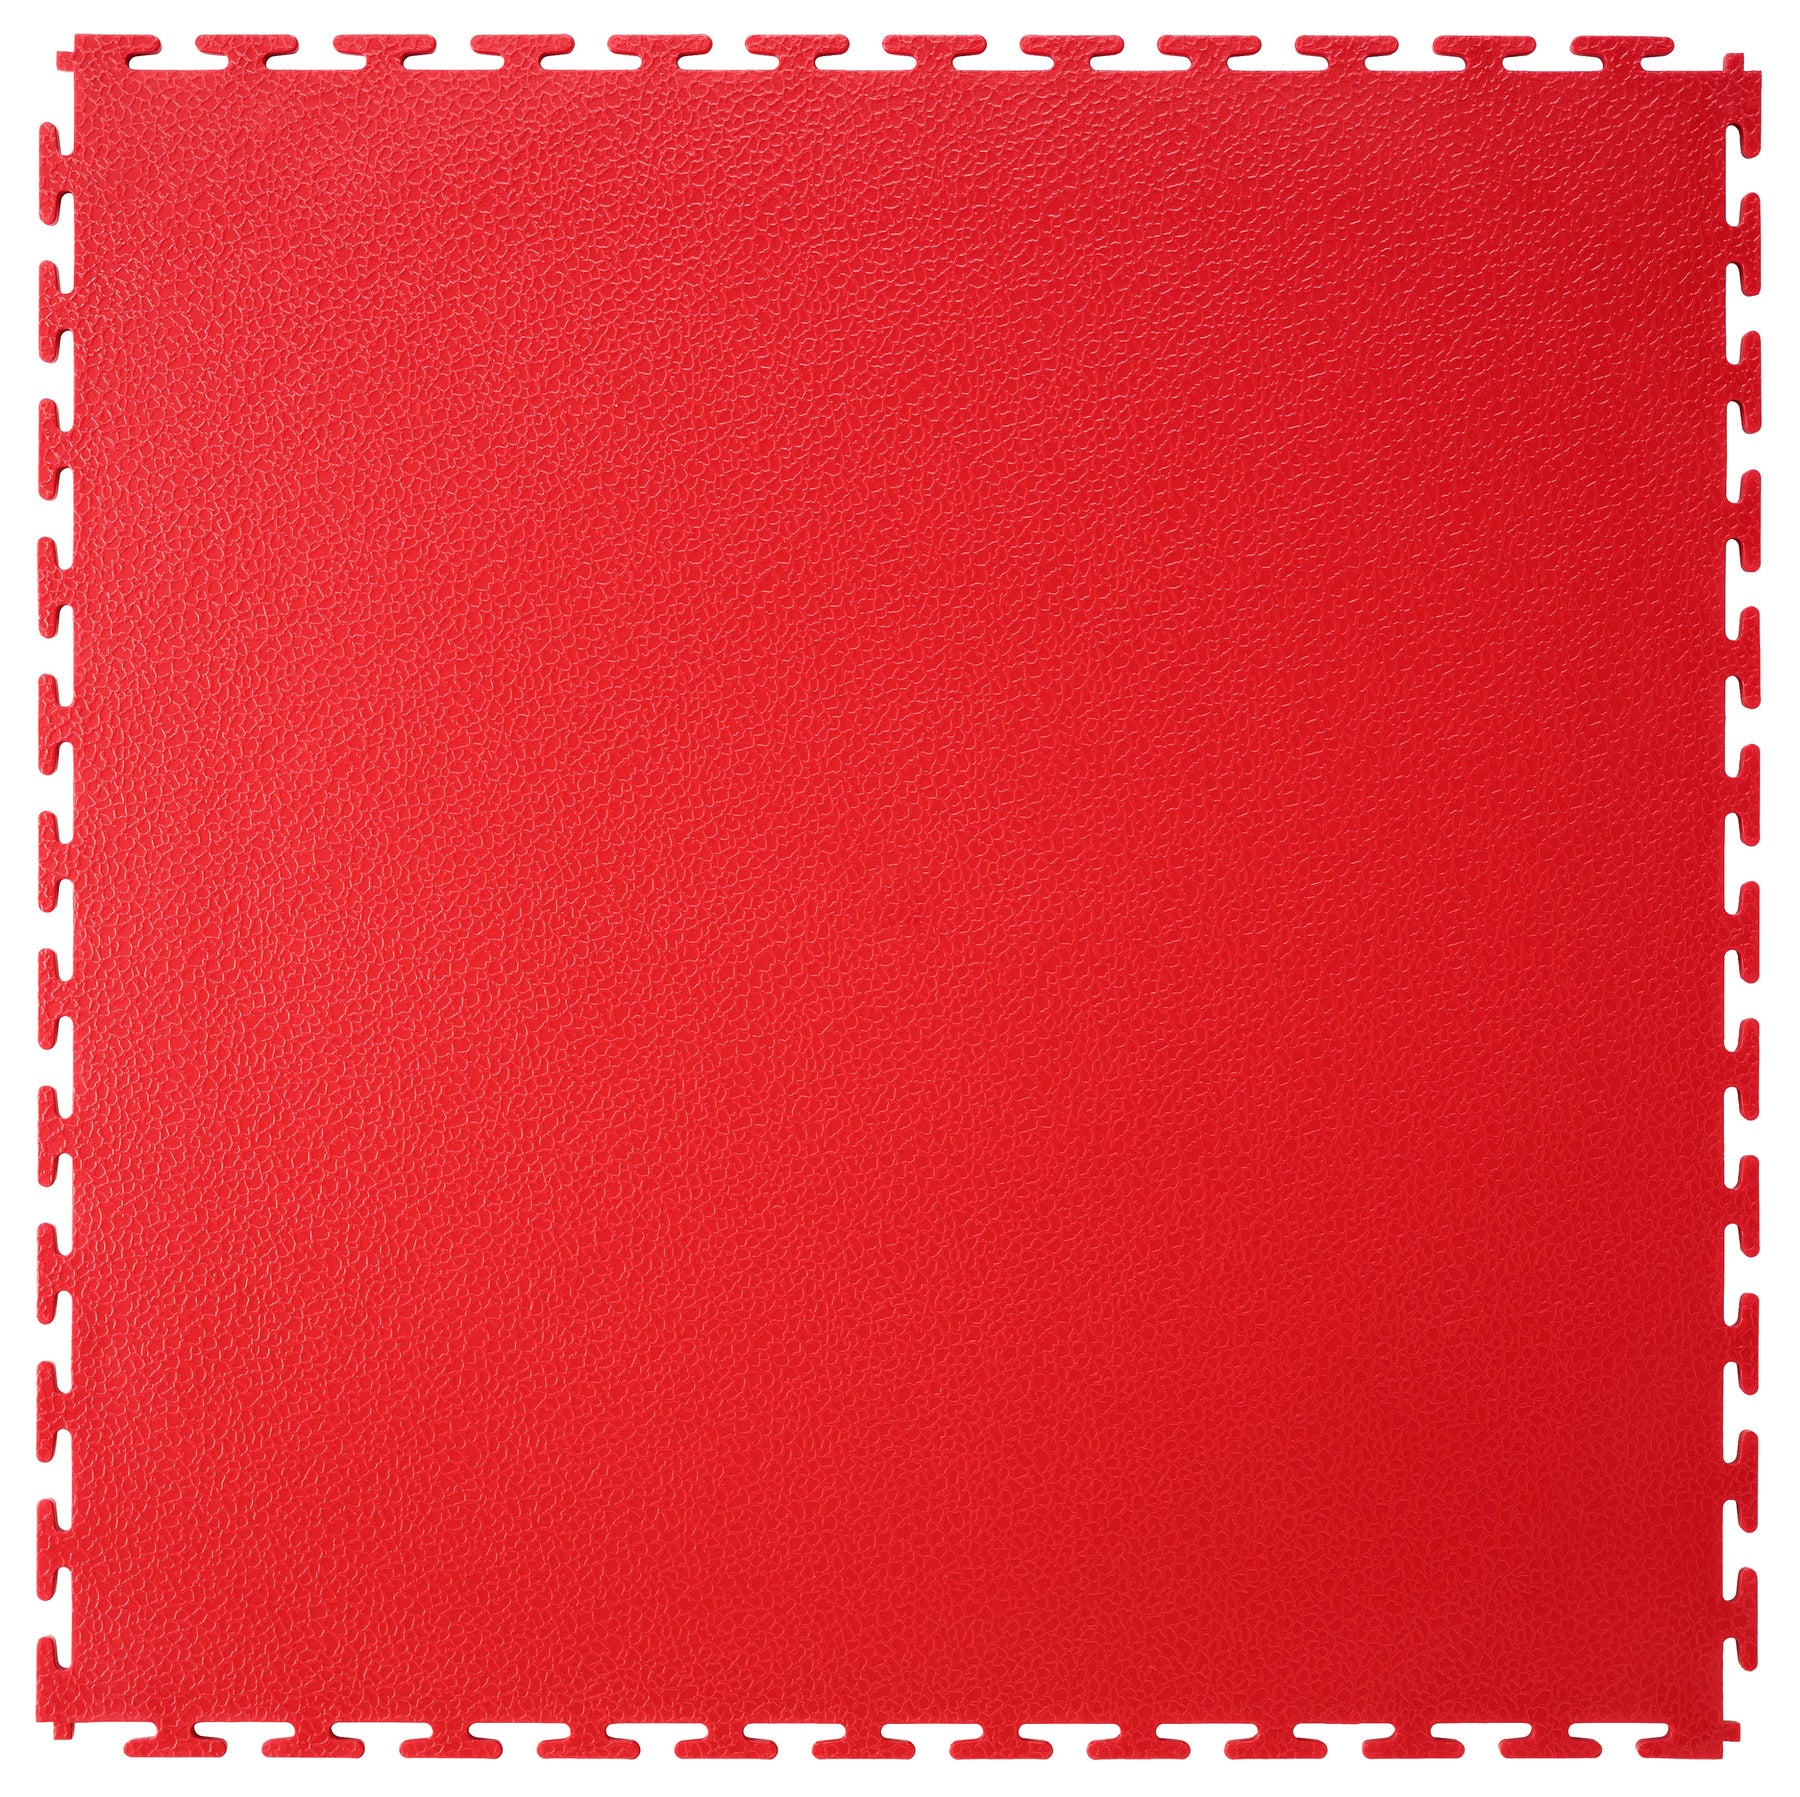 T Joint - Red 7mm Tile (Price per M2) – BATCH END